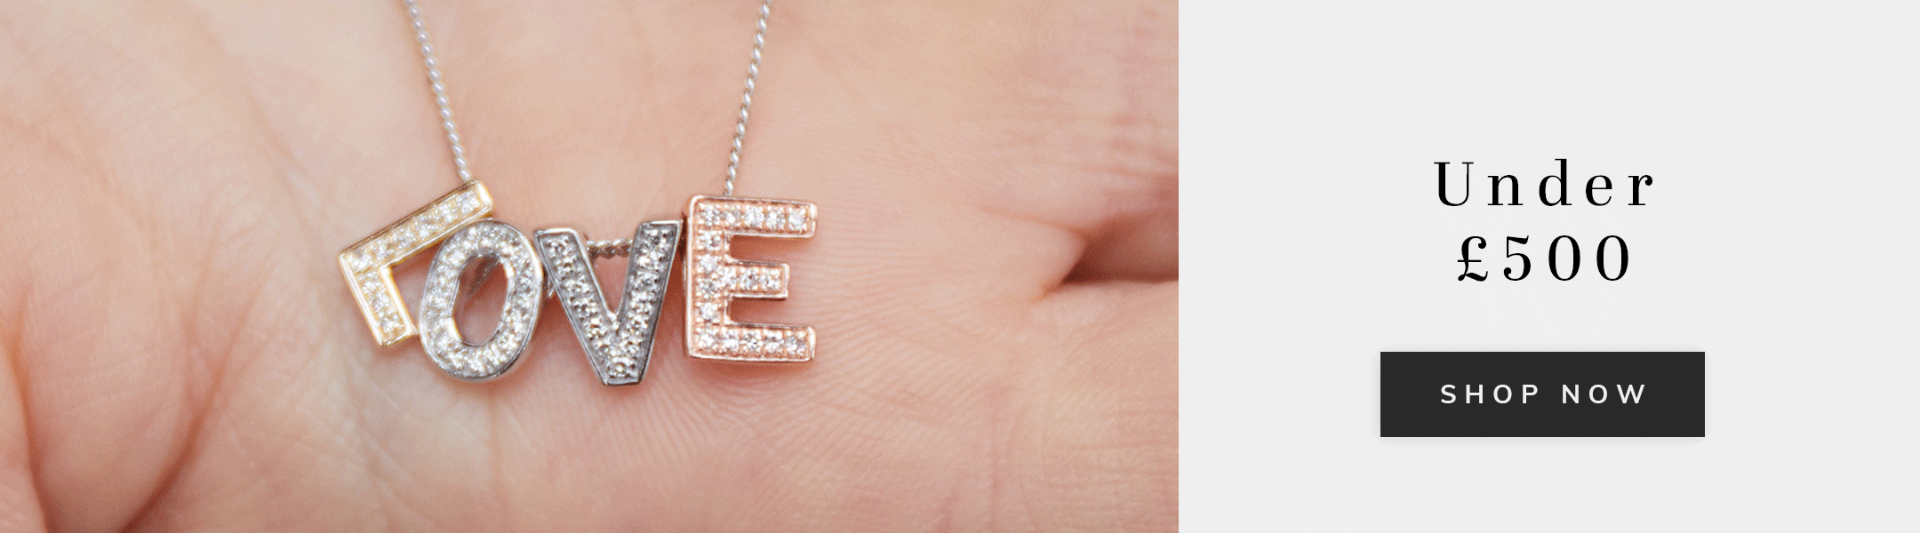 A love pendant with text under £500 shop now